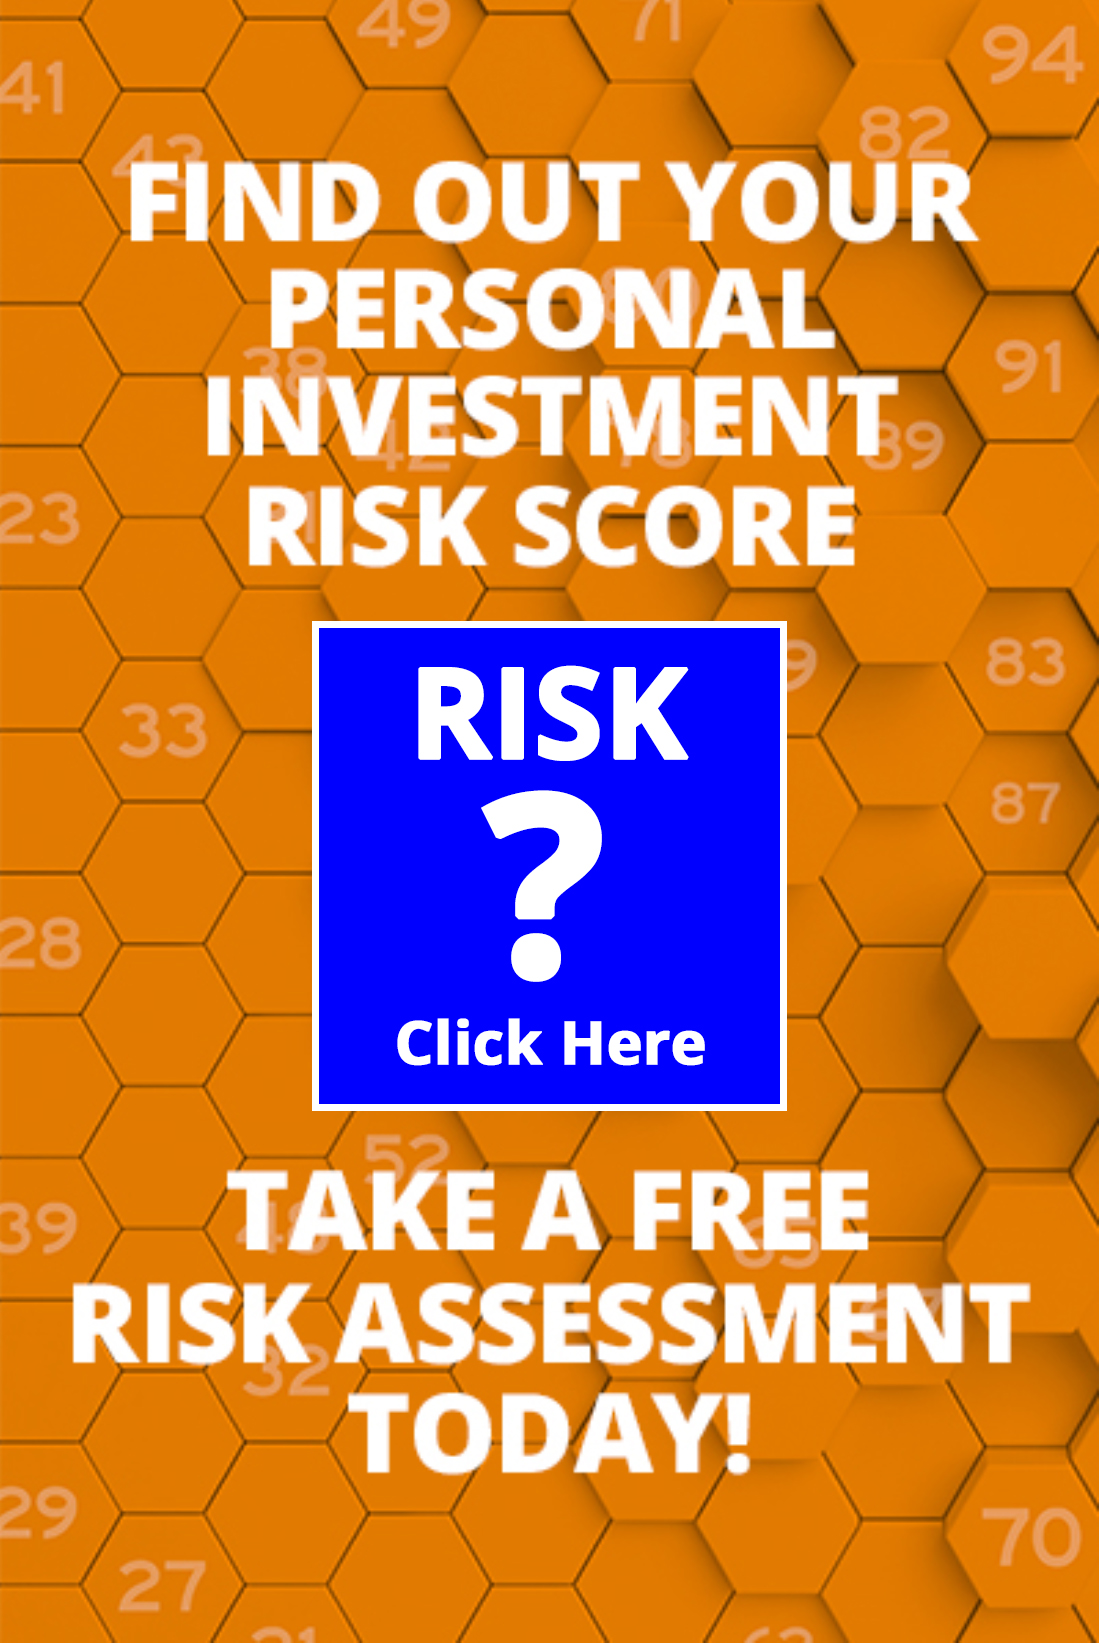 Vertical Rectangle Box Image with orange background and white text stating “Find Out Your Personal Investment Risk Score”, “Take a Free Risk Assessment Today!”